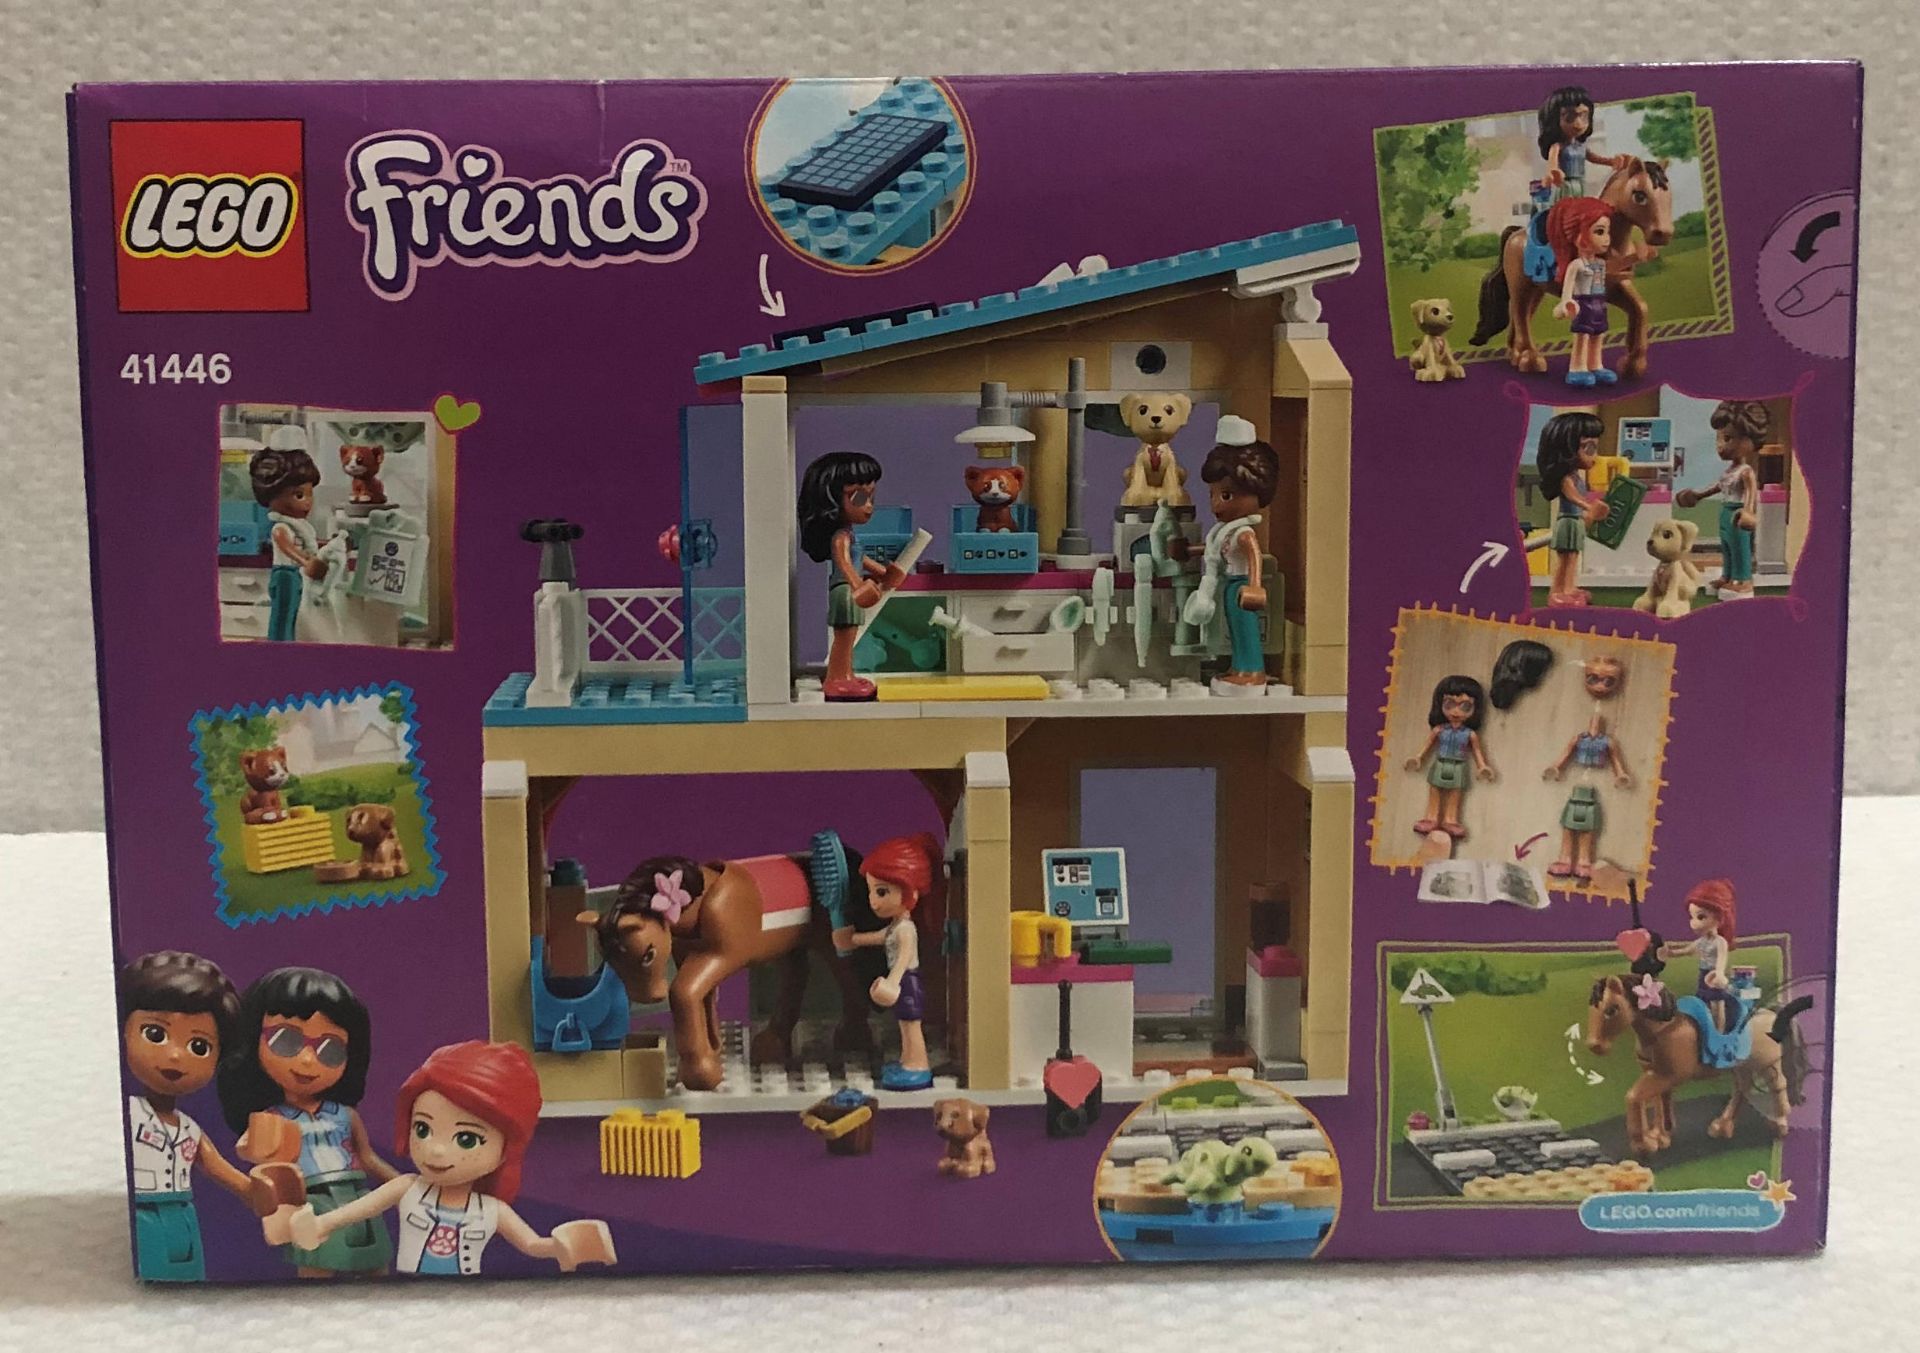 1 x Lego Friends Heartlake City Vet Clinic Animal Rescue Playset - Model 41446 - New/Boxed - Image 3 of 4